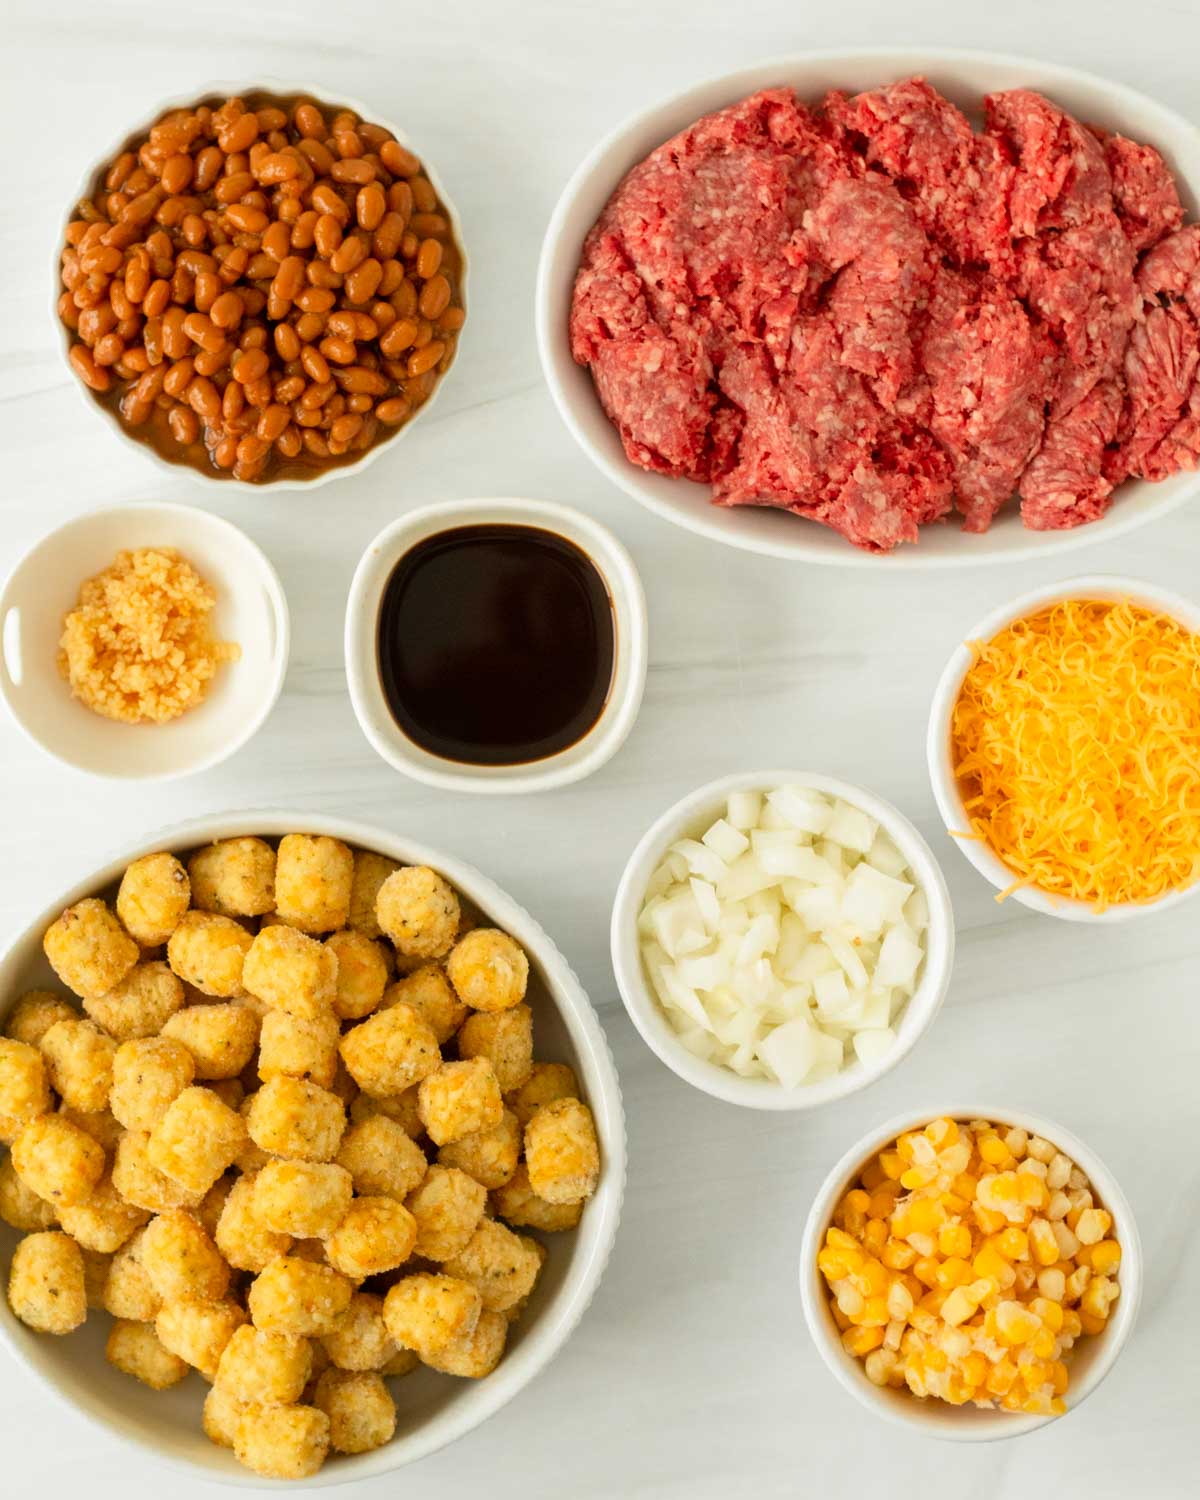 This cowboy tater tot casserole is an easy one-pan dinner recipe made with ground beef mixed with baked beans and corn and topped with cheese and tater tots. We love this easy kid-friendly dinner for a quick weeknight meal.